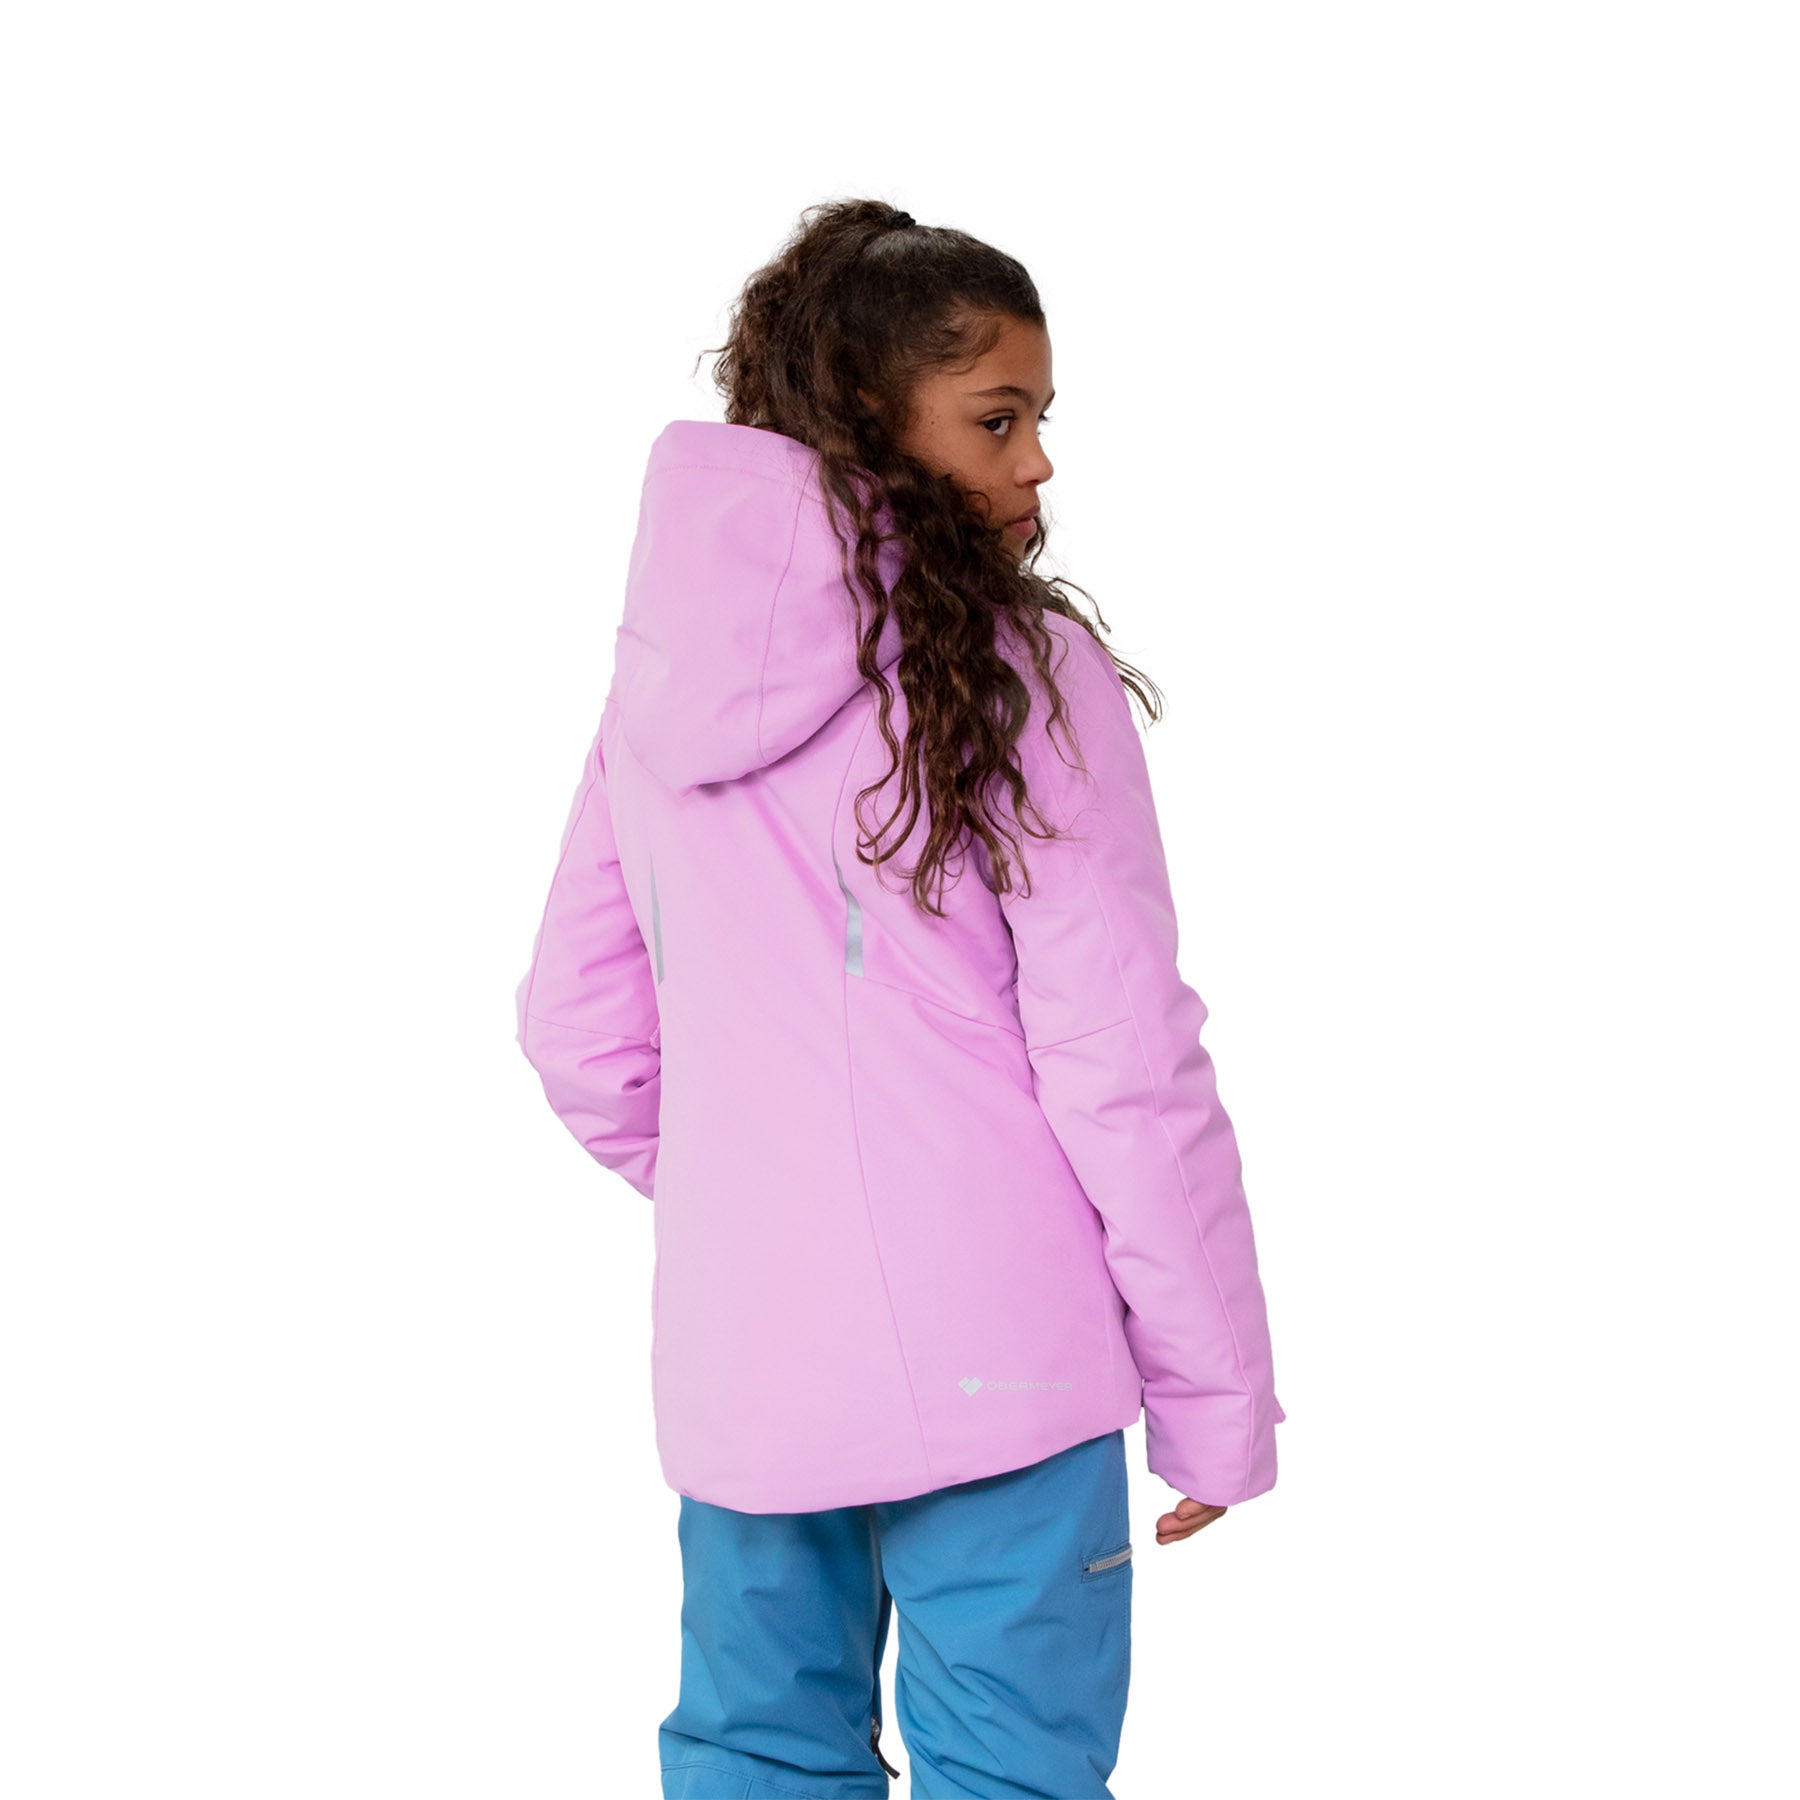 Hero image featuring the back of a female model wearing the Obermeyer Leia Jacket in fairytale light purple with blue ski pants.